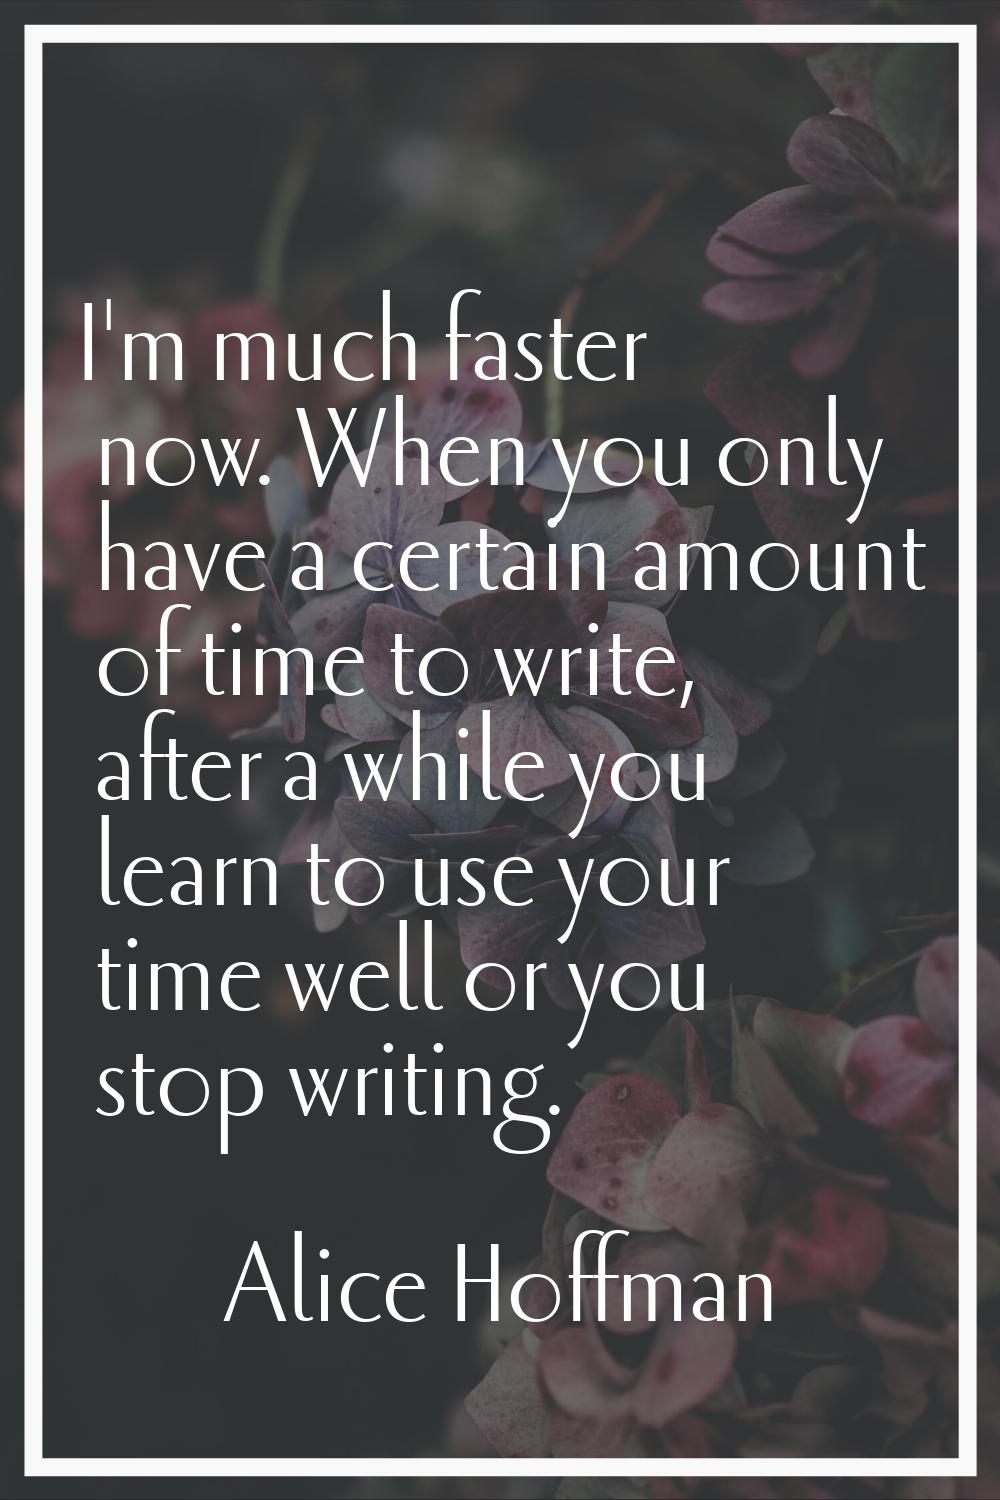 I'm much faster now. When you only have a certain amount of time to write, after a while you learn 